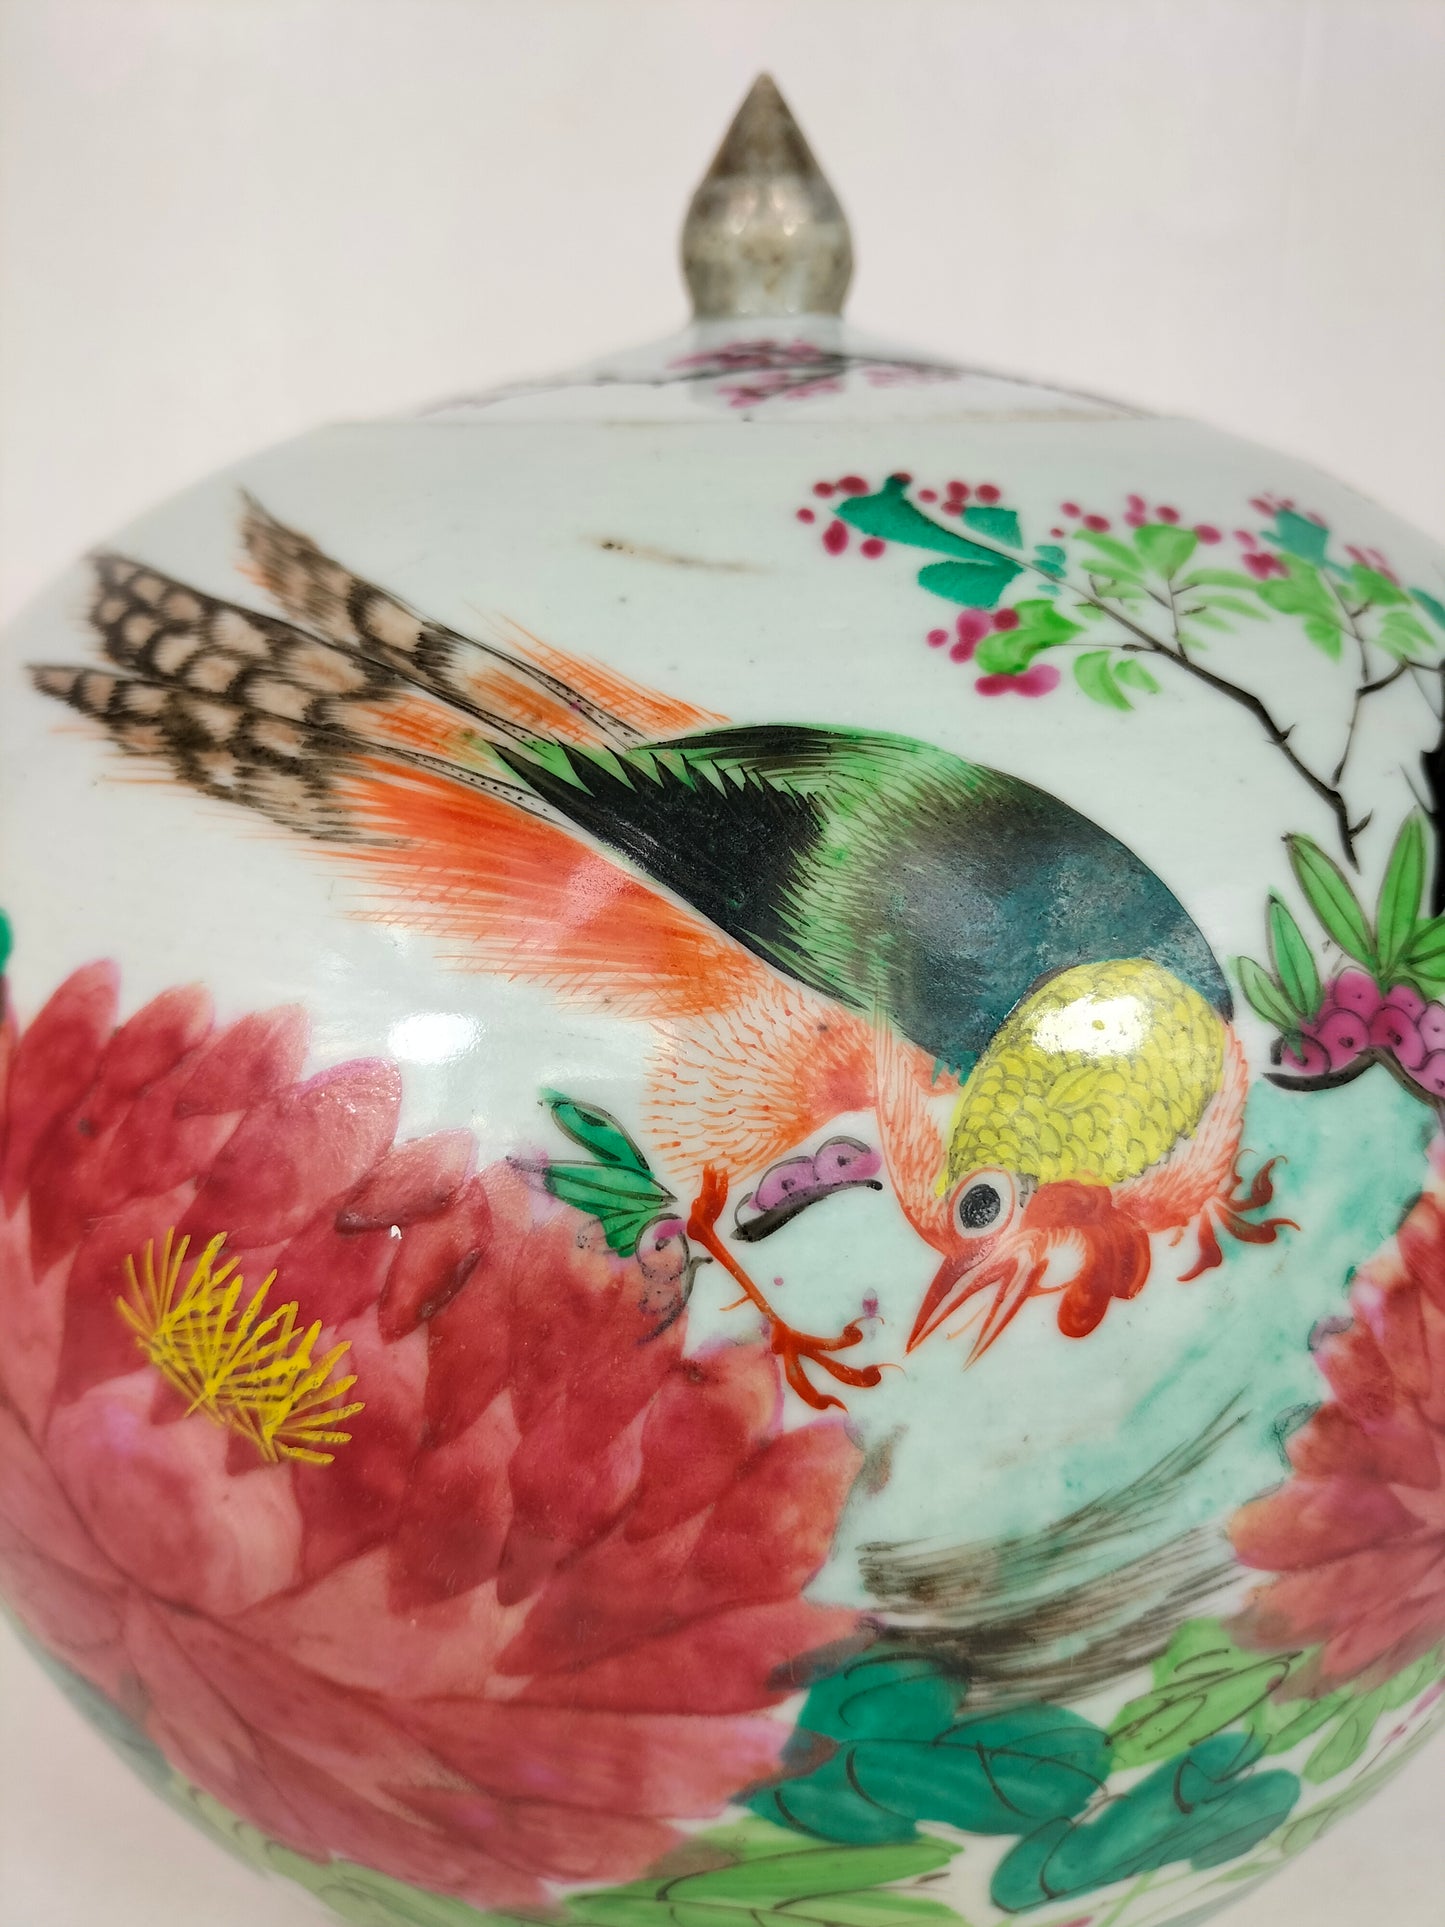 Antique Chinese qianjiang cai ginger jar decorated with a bird and flowers // Qing Dynasty - 19th century